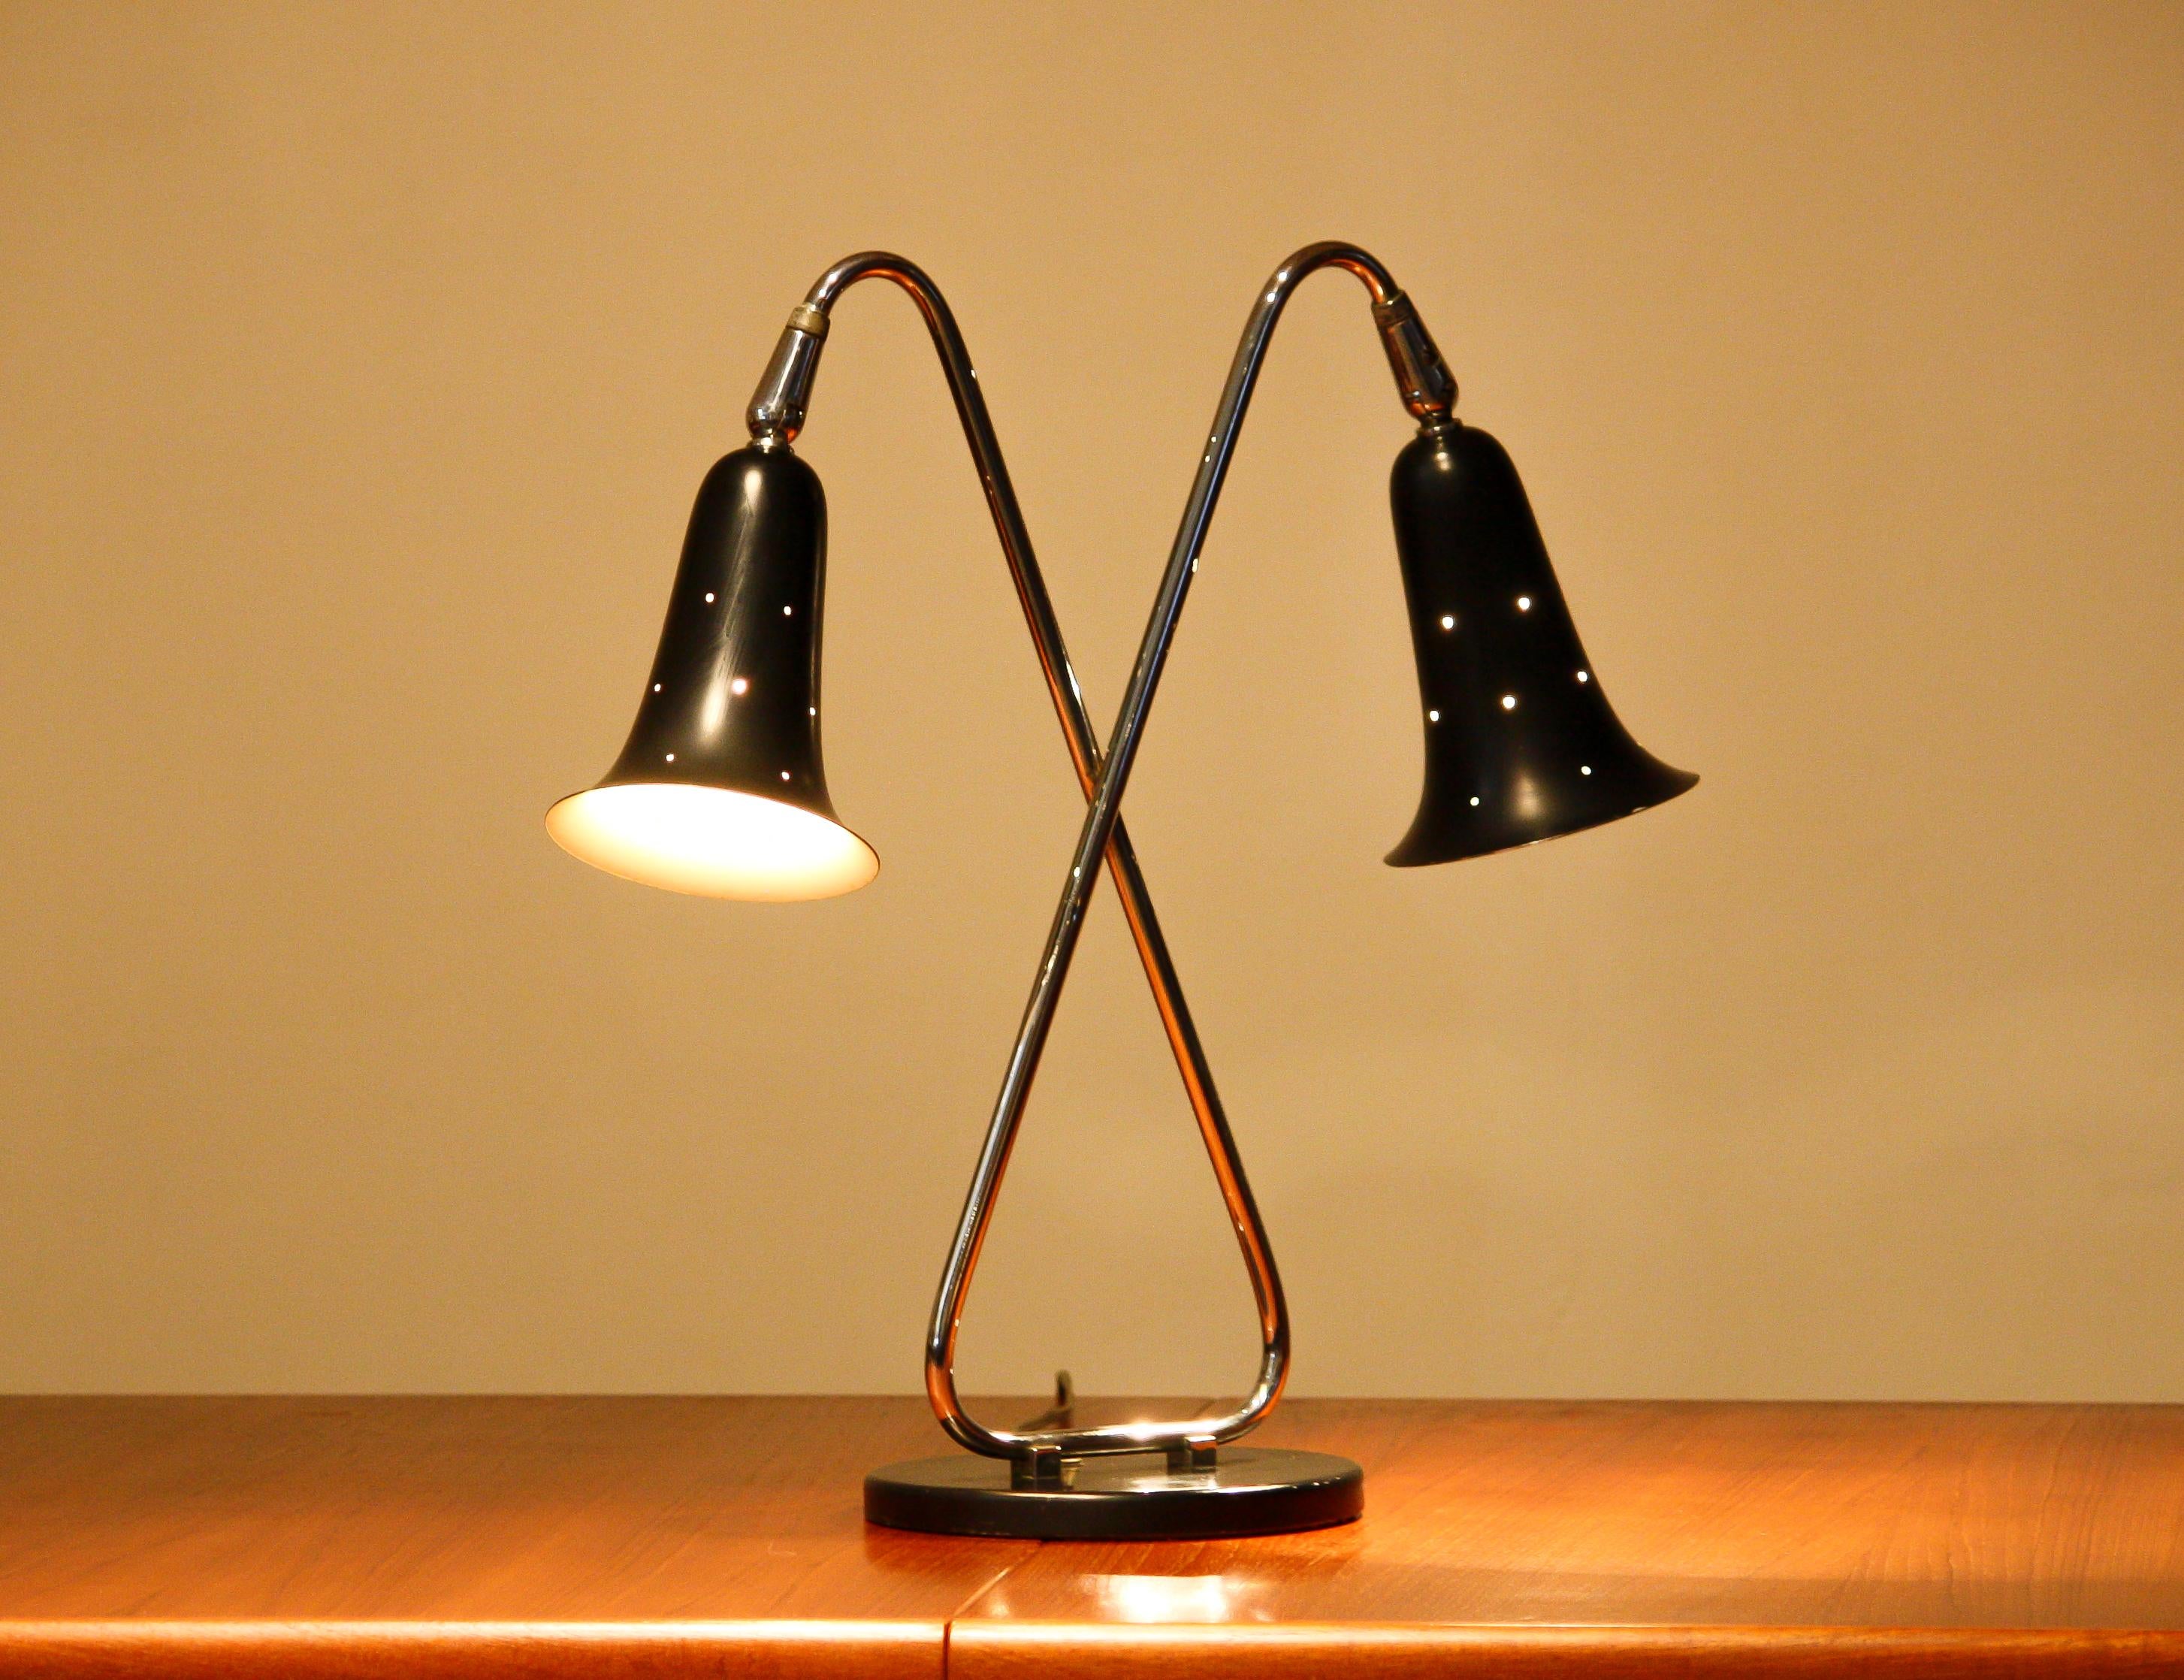 Mid-Century Modern 1950s Metal Black Lacquered and Chromed Desk / Table Lamp Made in the USA